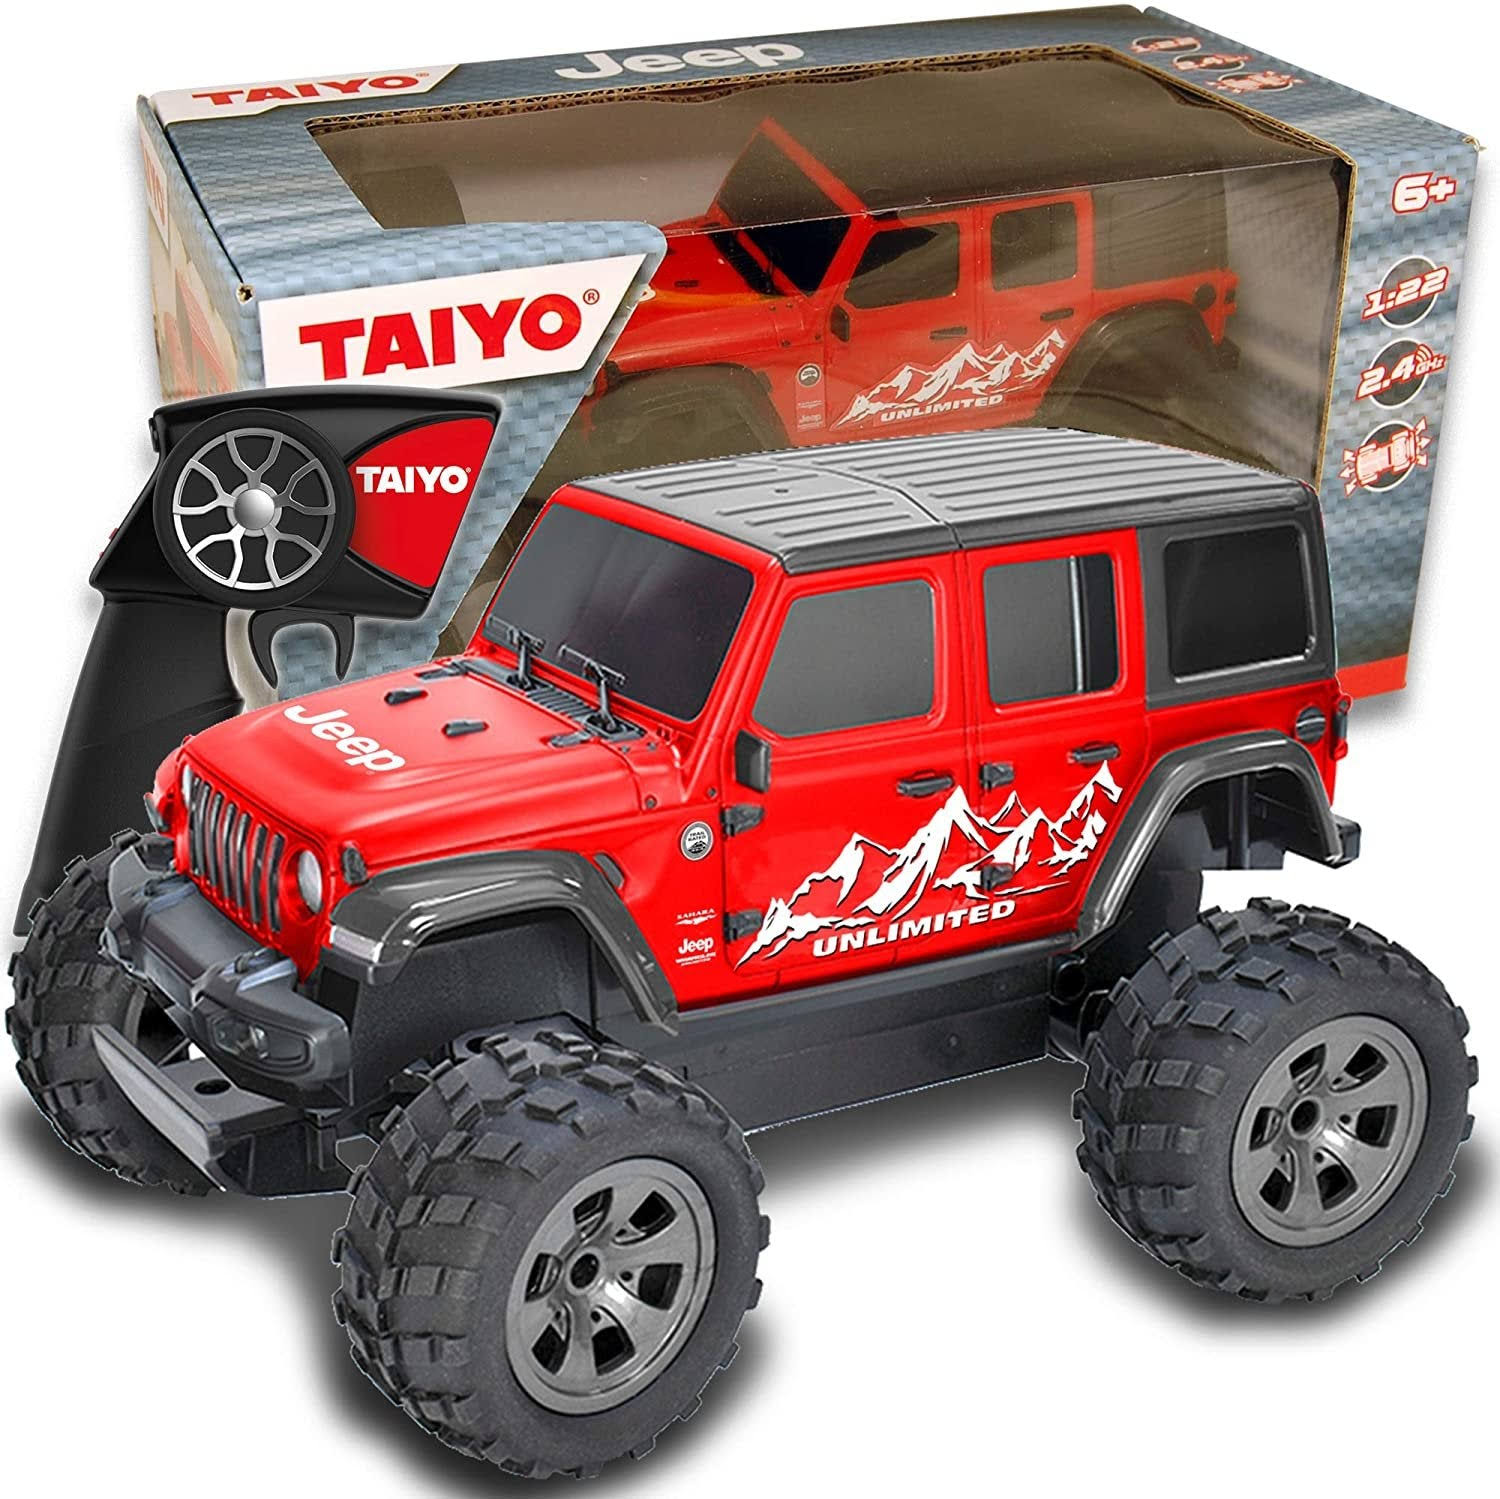 Thin Air Brands Taiyo RC Truck Jeep Rubicon, 1:22 Scale Remote Control Car with Handset Controller for Off-Road, High Speed, Fast Hobby Action for